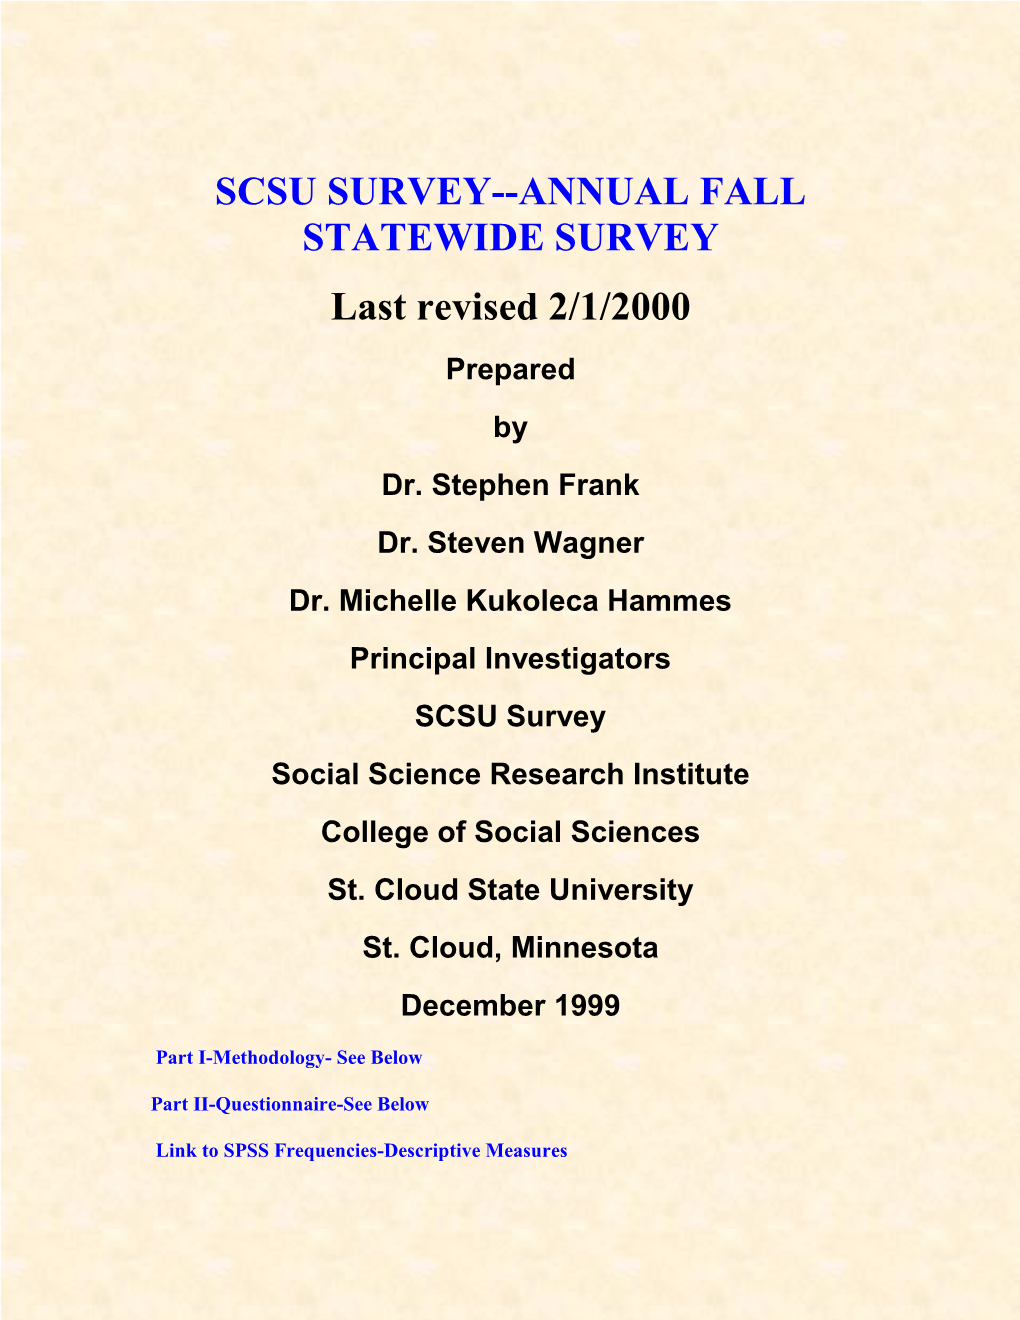 Fall 1999 Statewide Survey